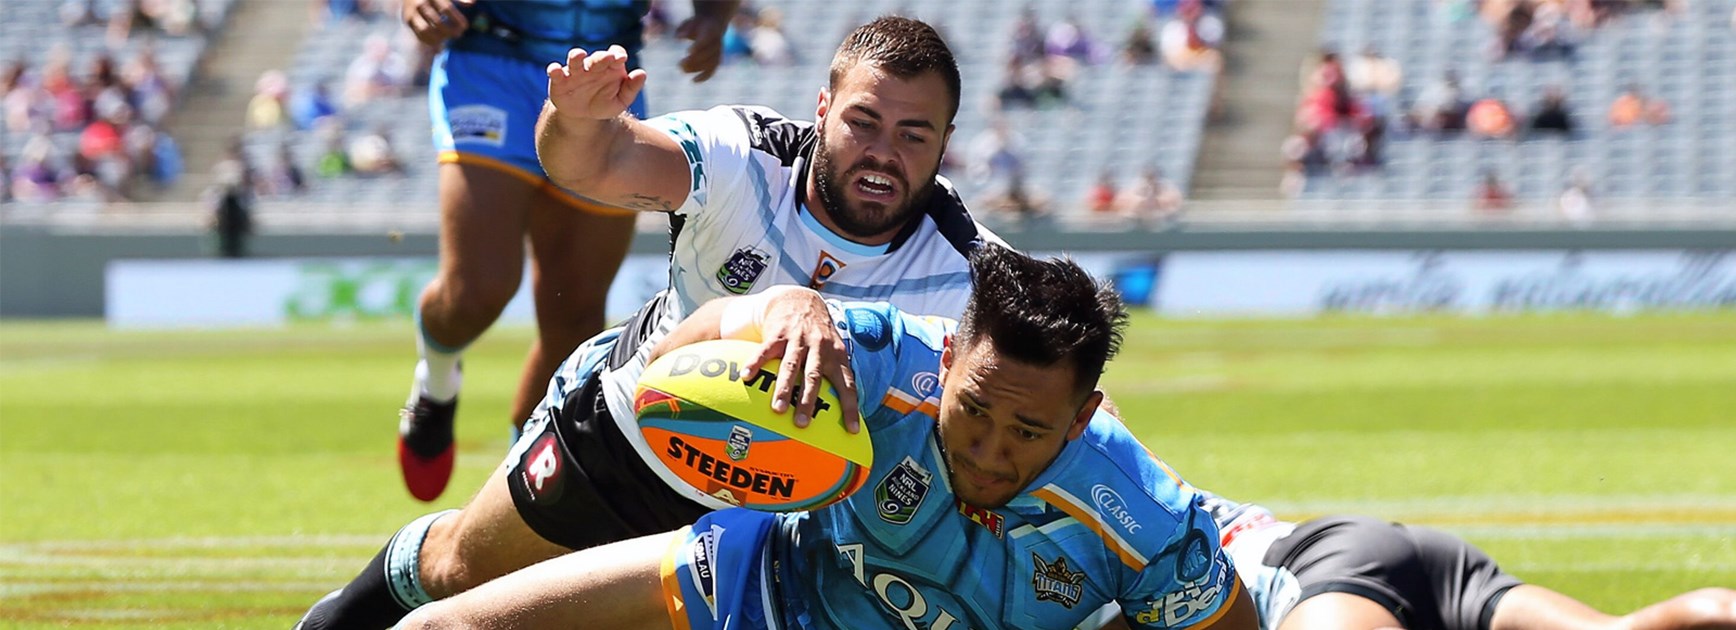 Nathaniel Peteru scores for the Titans against the Sharks at the Auckland Nines.